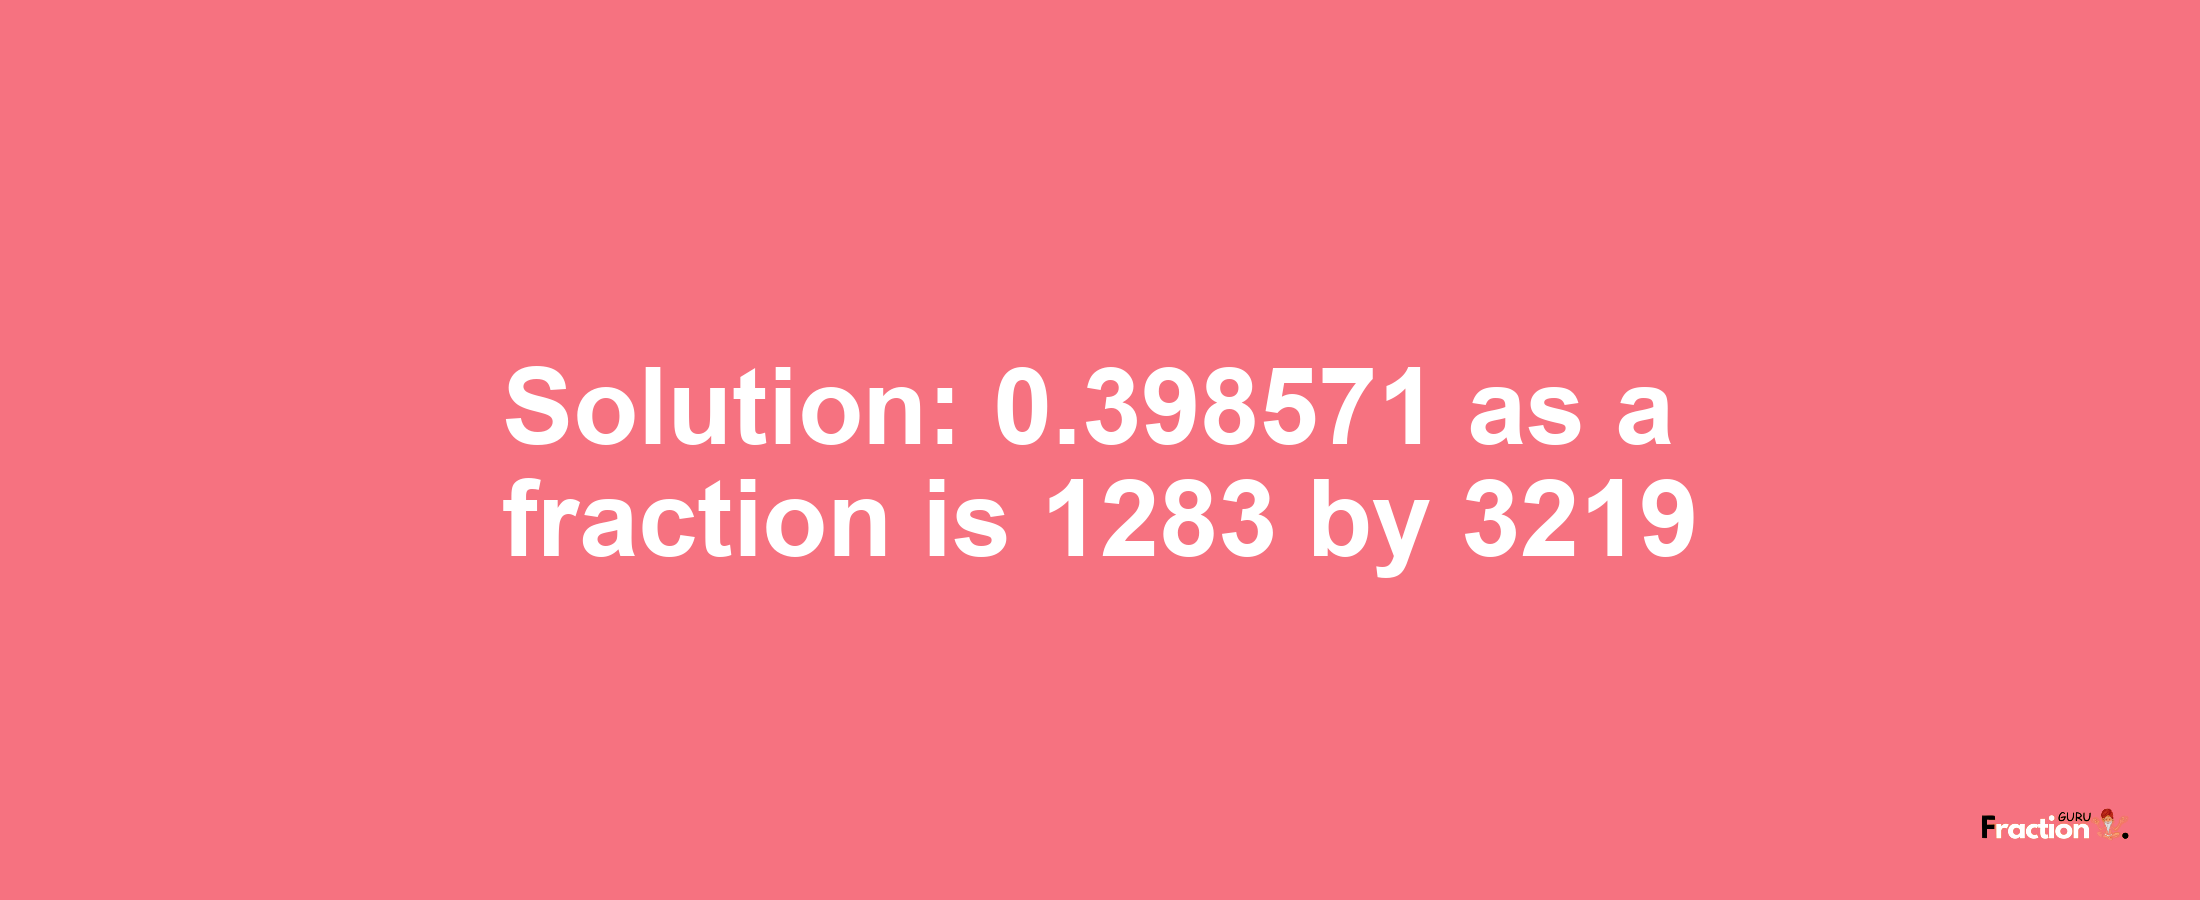 Solution:0.398571 as a fraction is 1283/3219